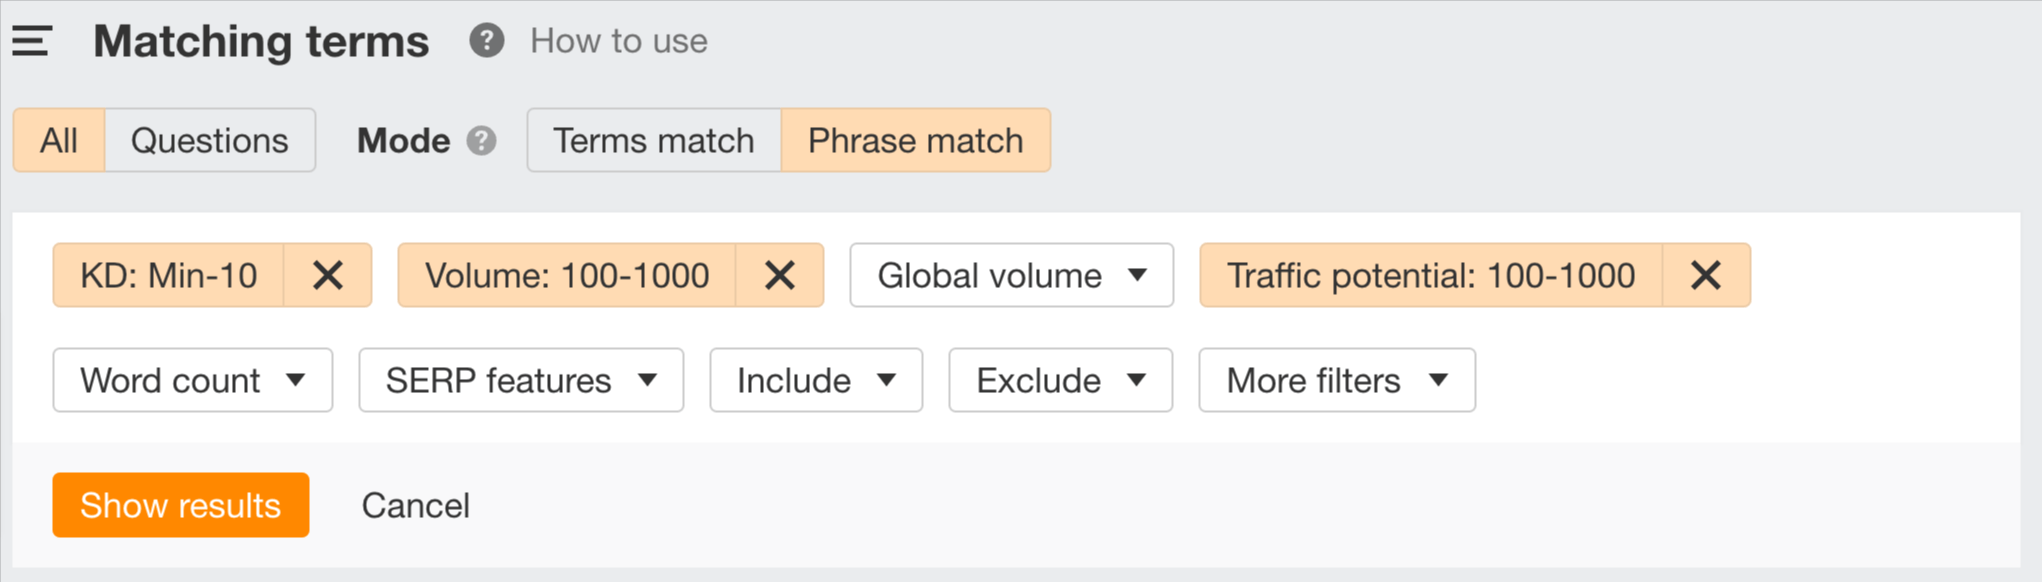 Search for keywords with low difficulty and minimal search volume